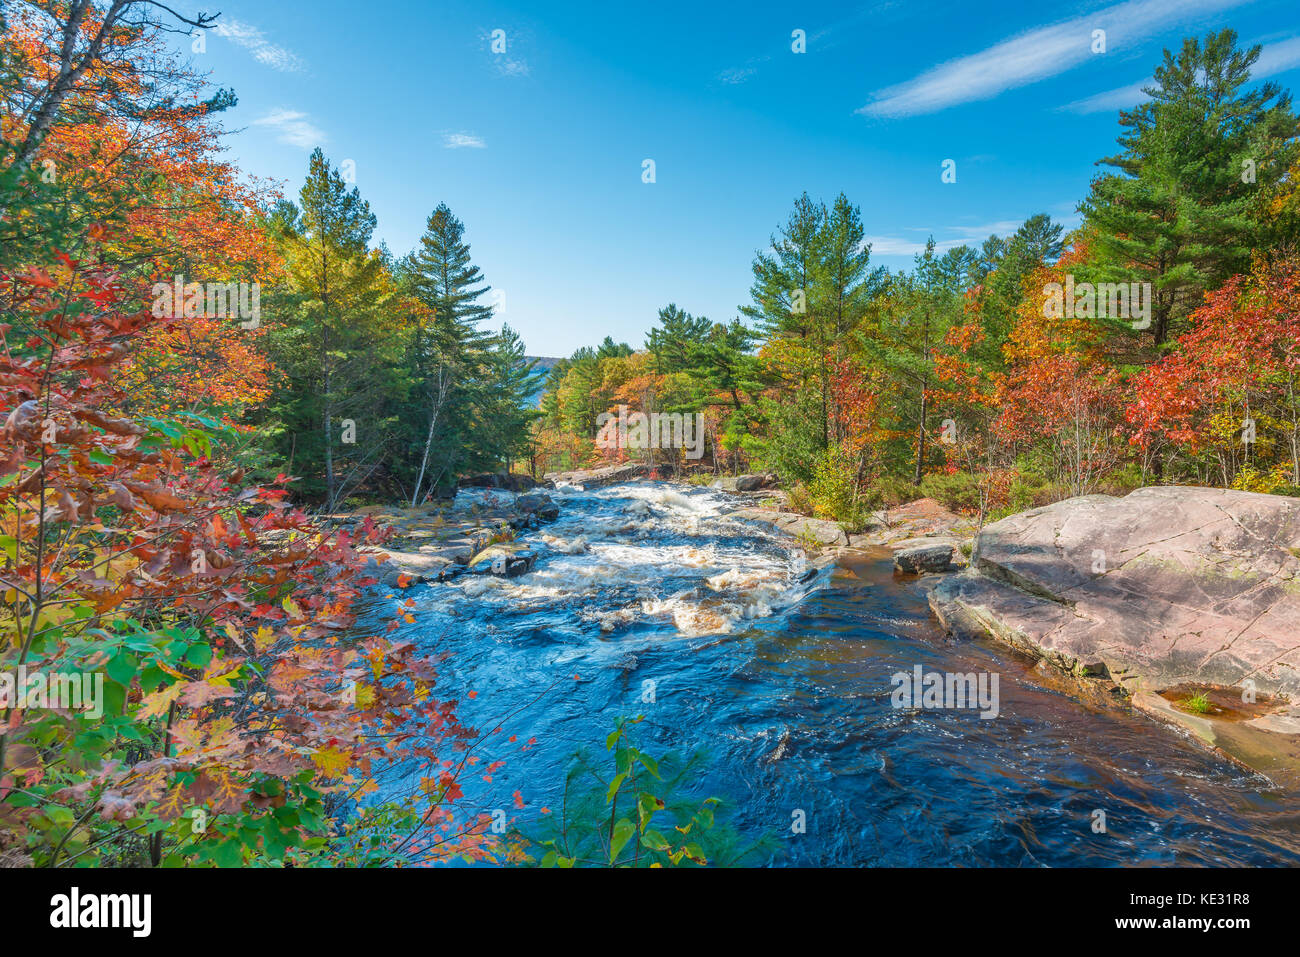 Lower Rosseau Falls located near Rosseau Ontario Canada photographed on a beautiful autumn day. Stock Photo